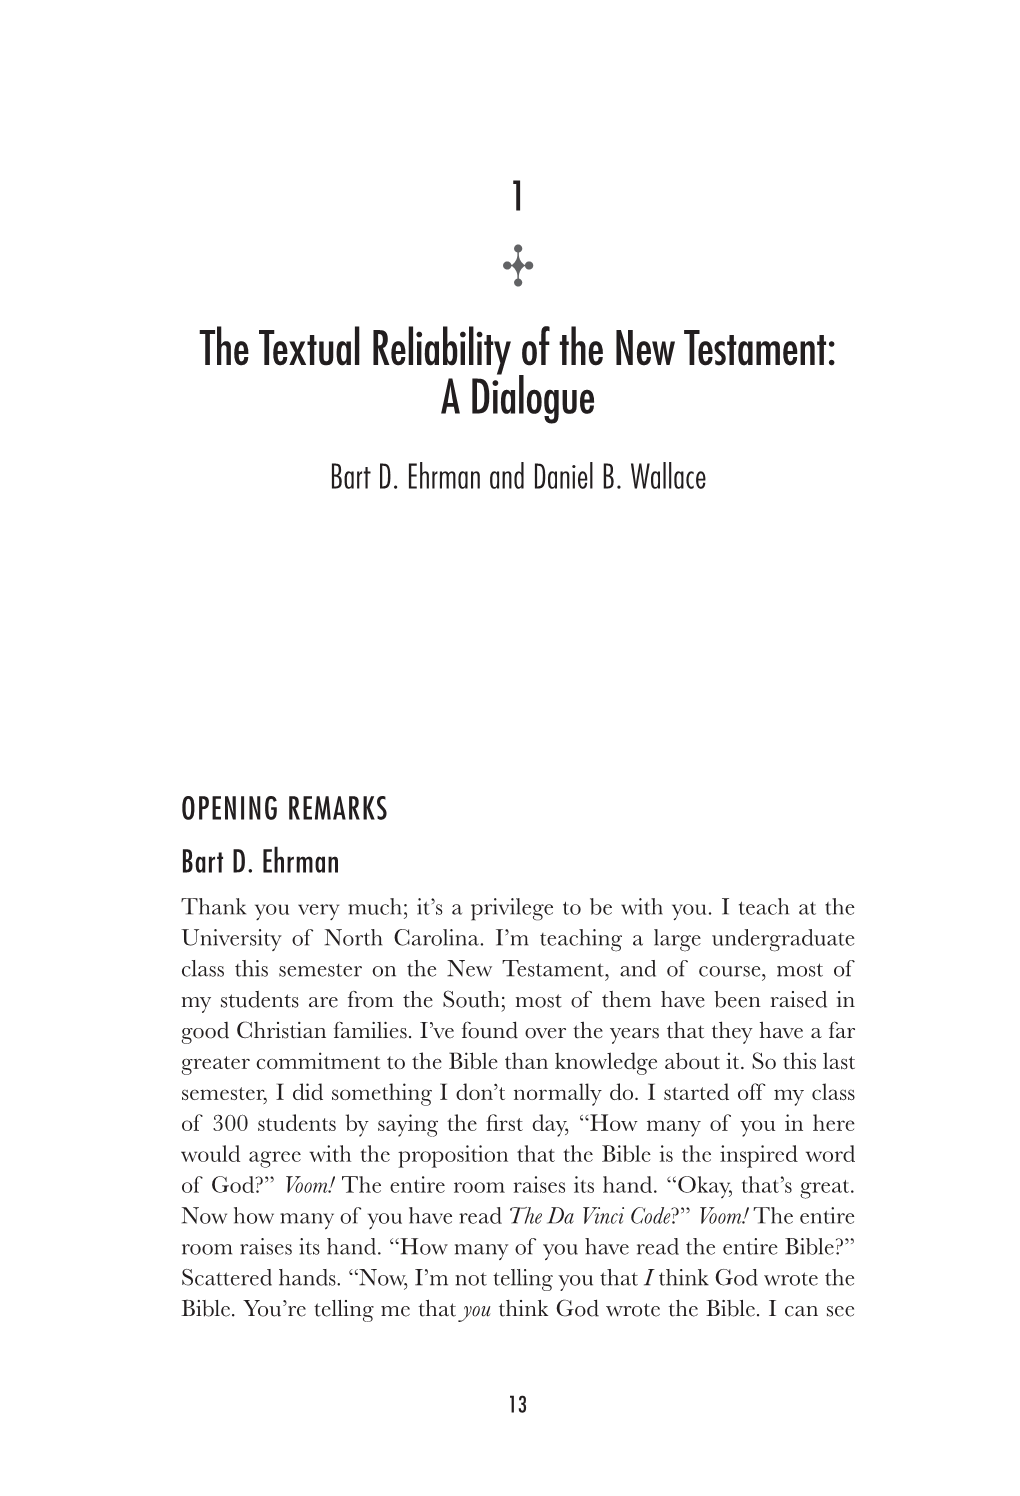 The Textual Reliability of the New Testament: a Dialogue